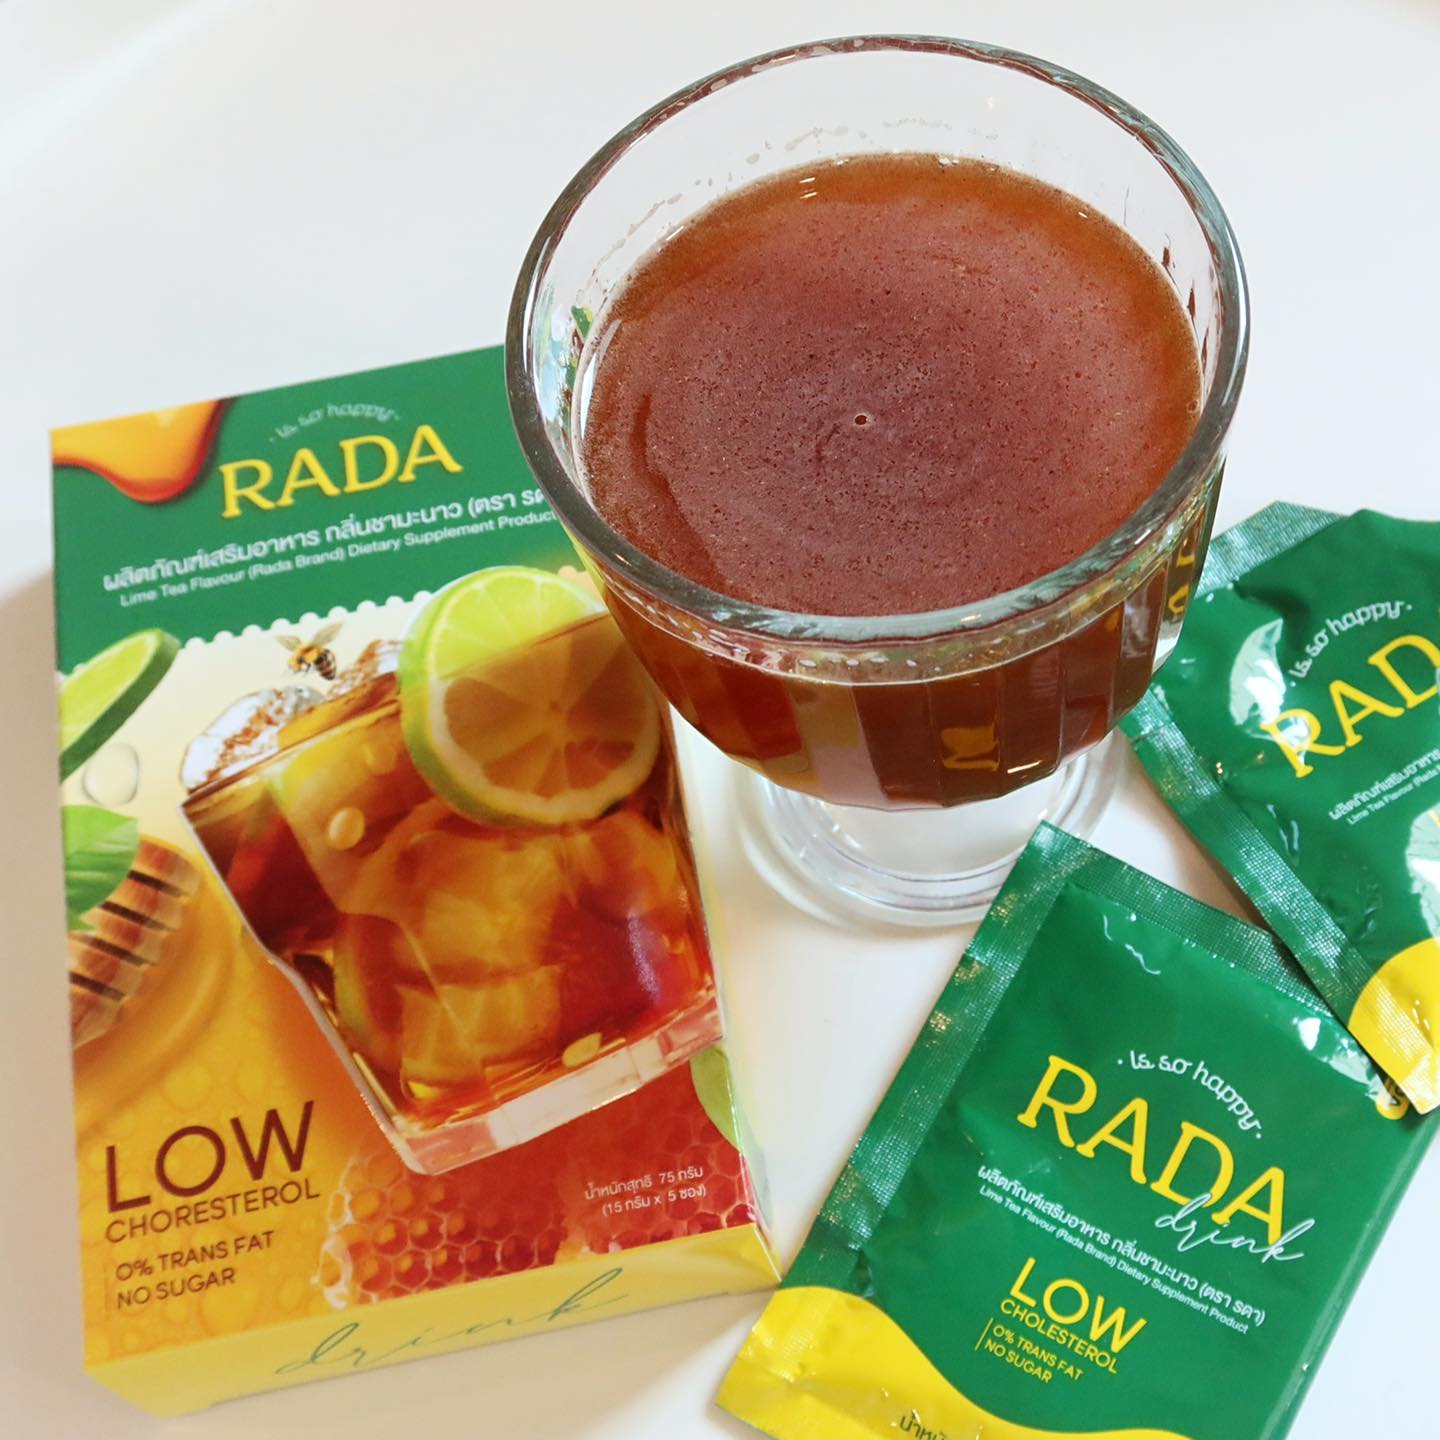 1BOX* RADA FIBER dietary supplement Help reduce constipation. flat belly, weight loss, firming and slimming945551